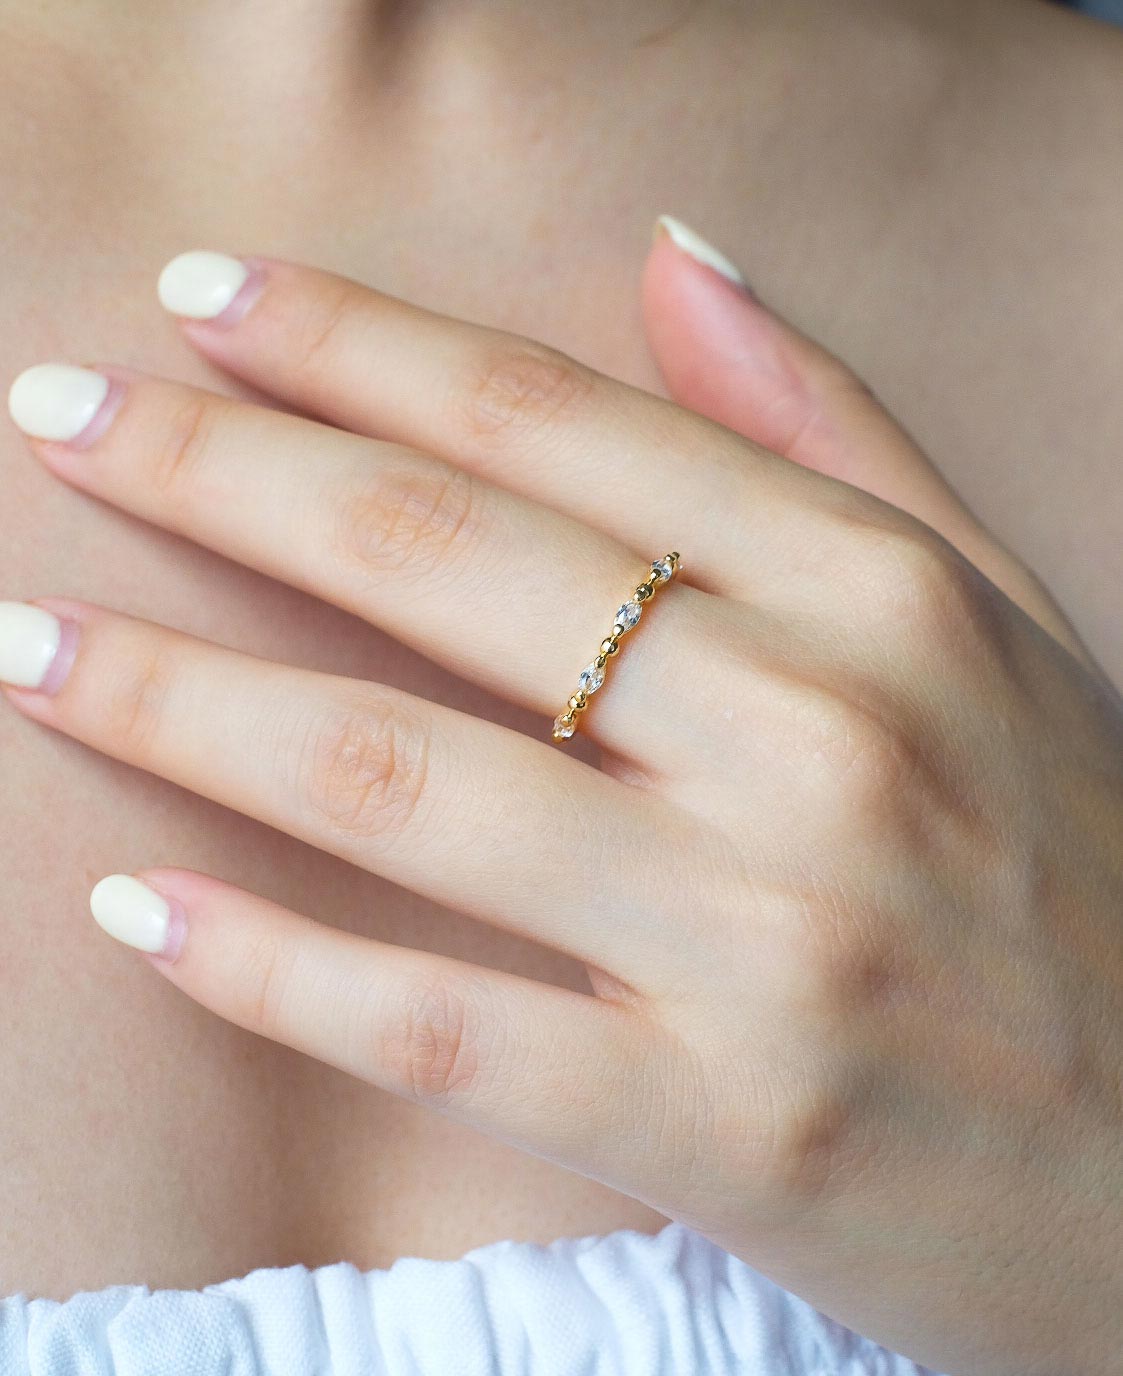 Model wearing Meline 14k Gold Bead Ring from Sachelle Collective